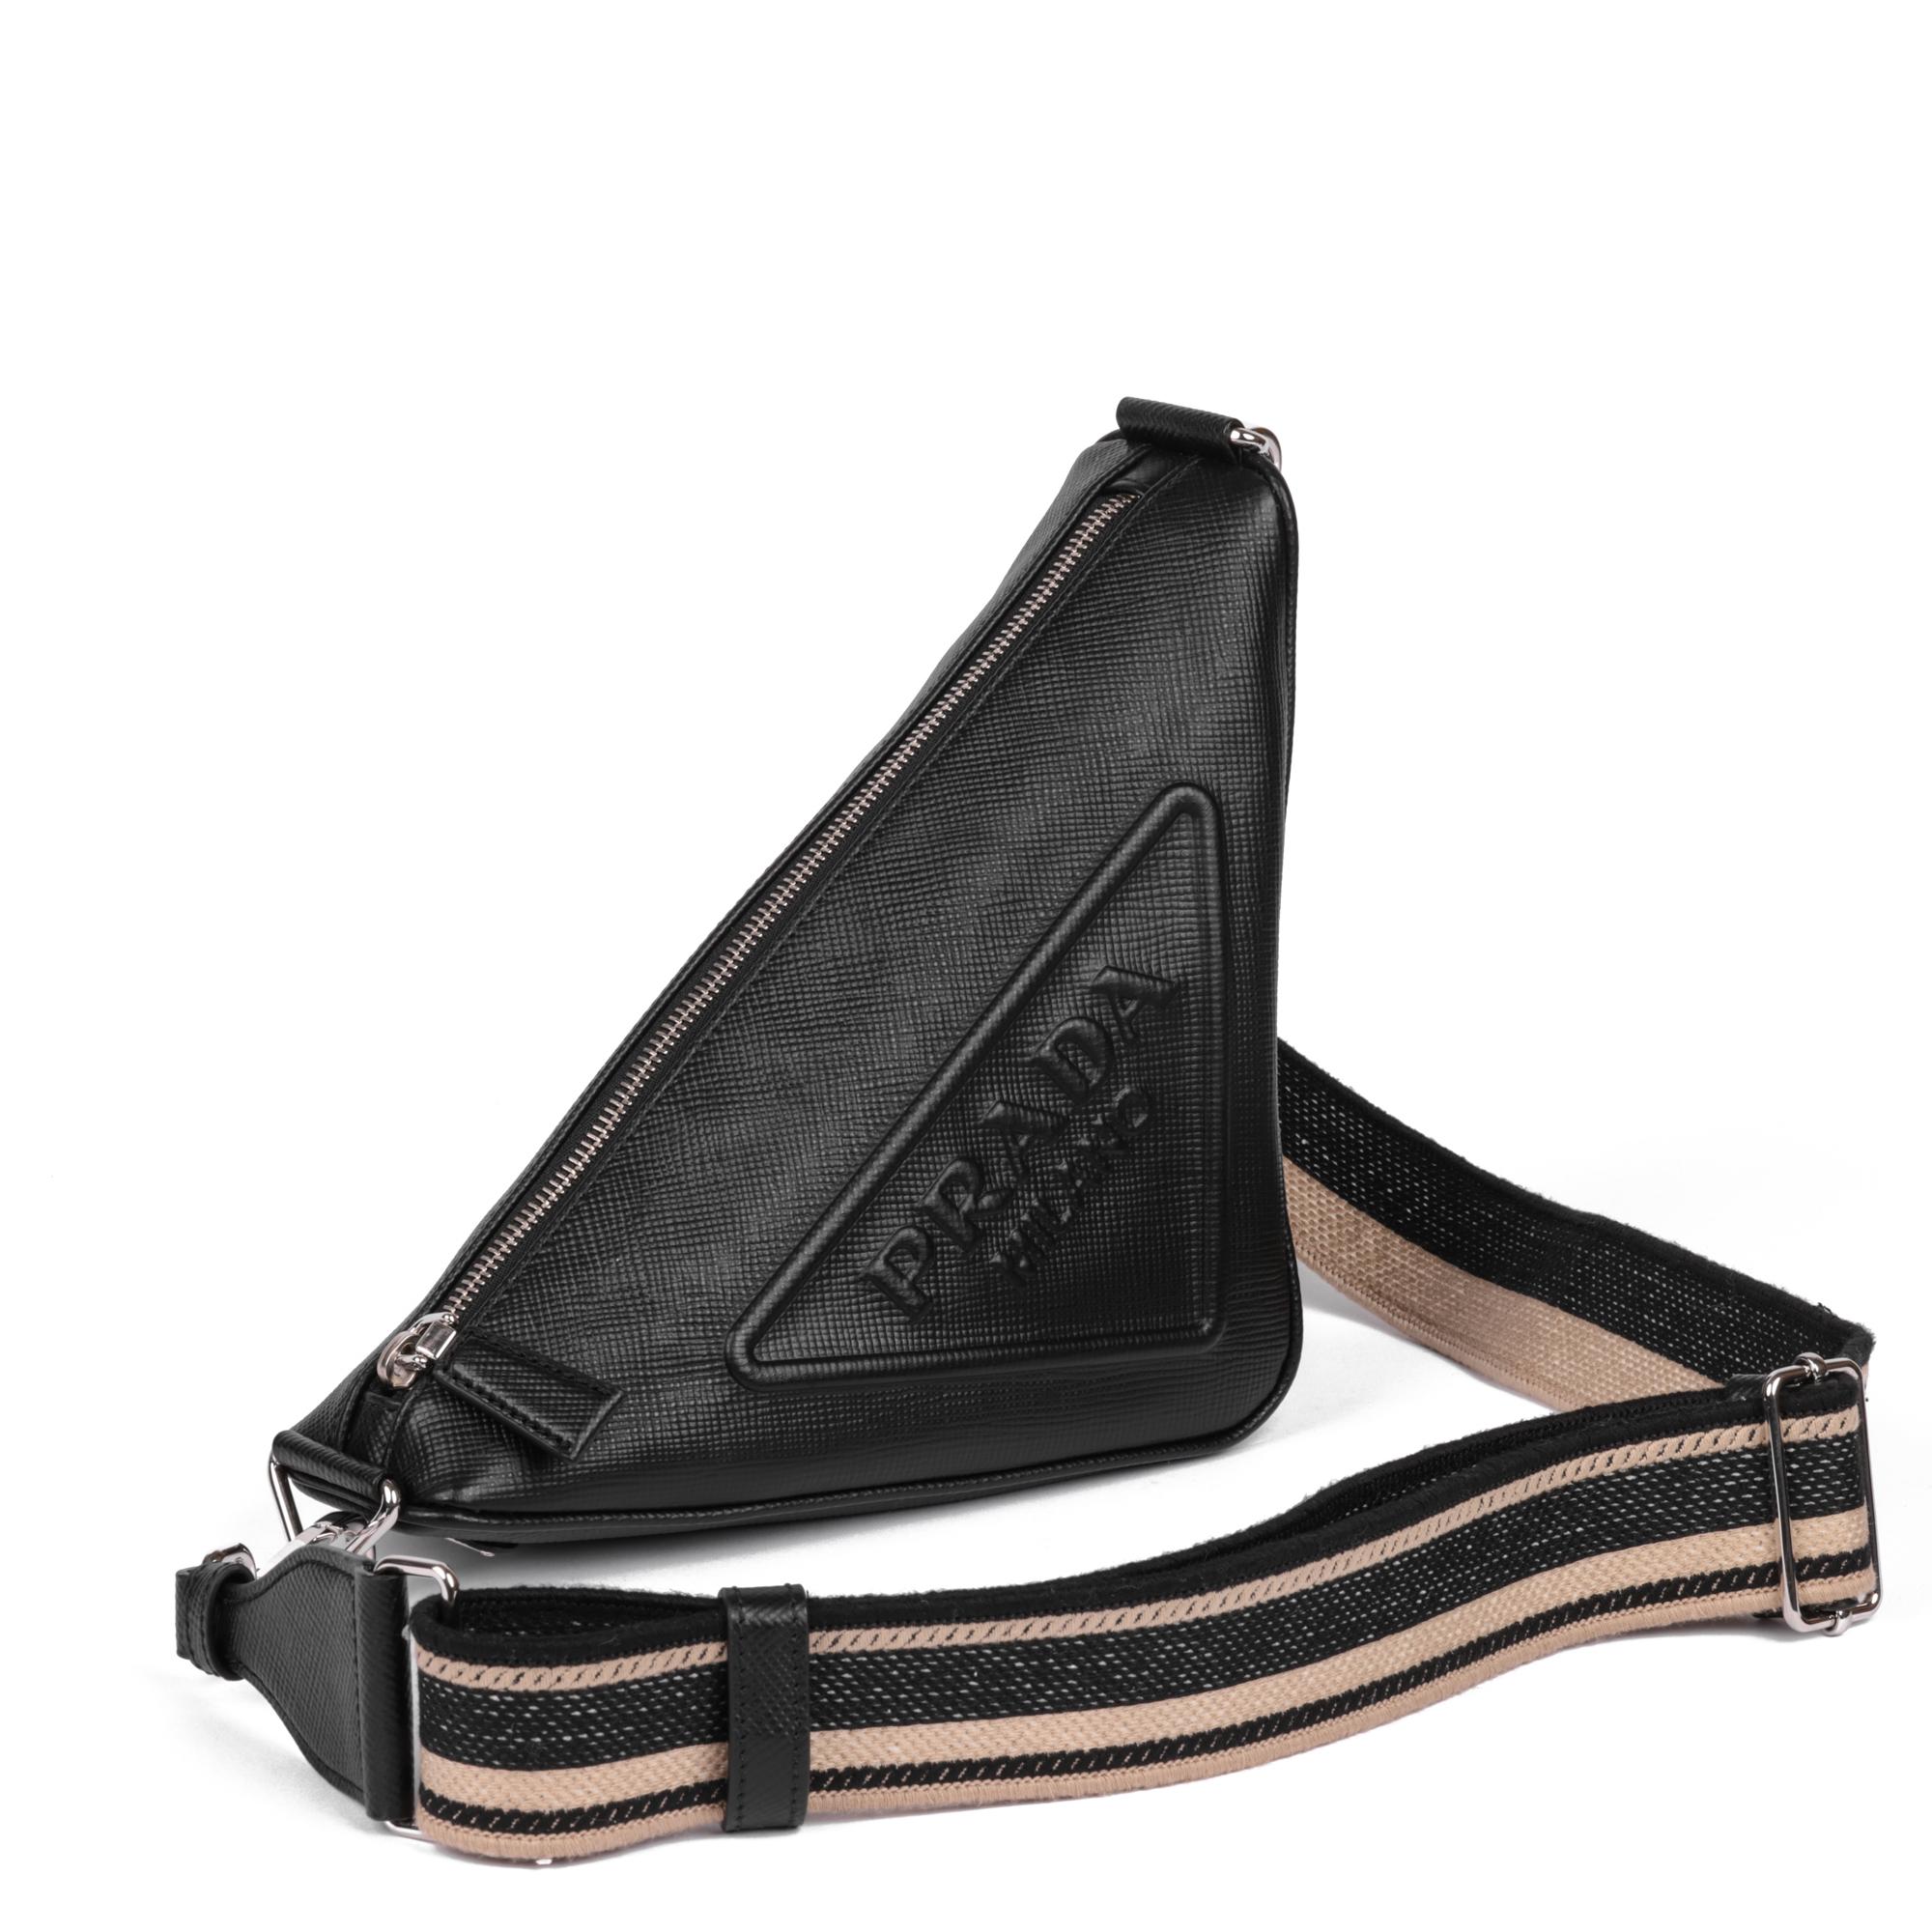 PRADA
Black Saffiano Leather Triangle Shoulder Bag

Serial Number: 7/D
Age (Circa): 2022
Accompanied By: Prada Dust Bag
Authenticity Details: Serial Tag (Made in Italy)
Gender: Ladies
Type: Shoulder, Crossbody

Colour: Black
Hardware: